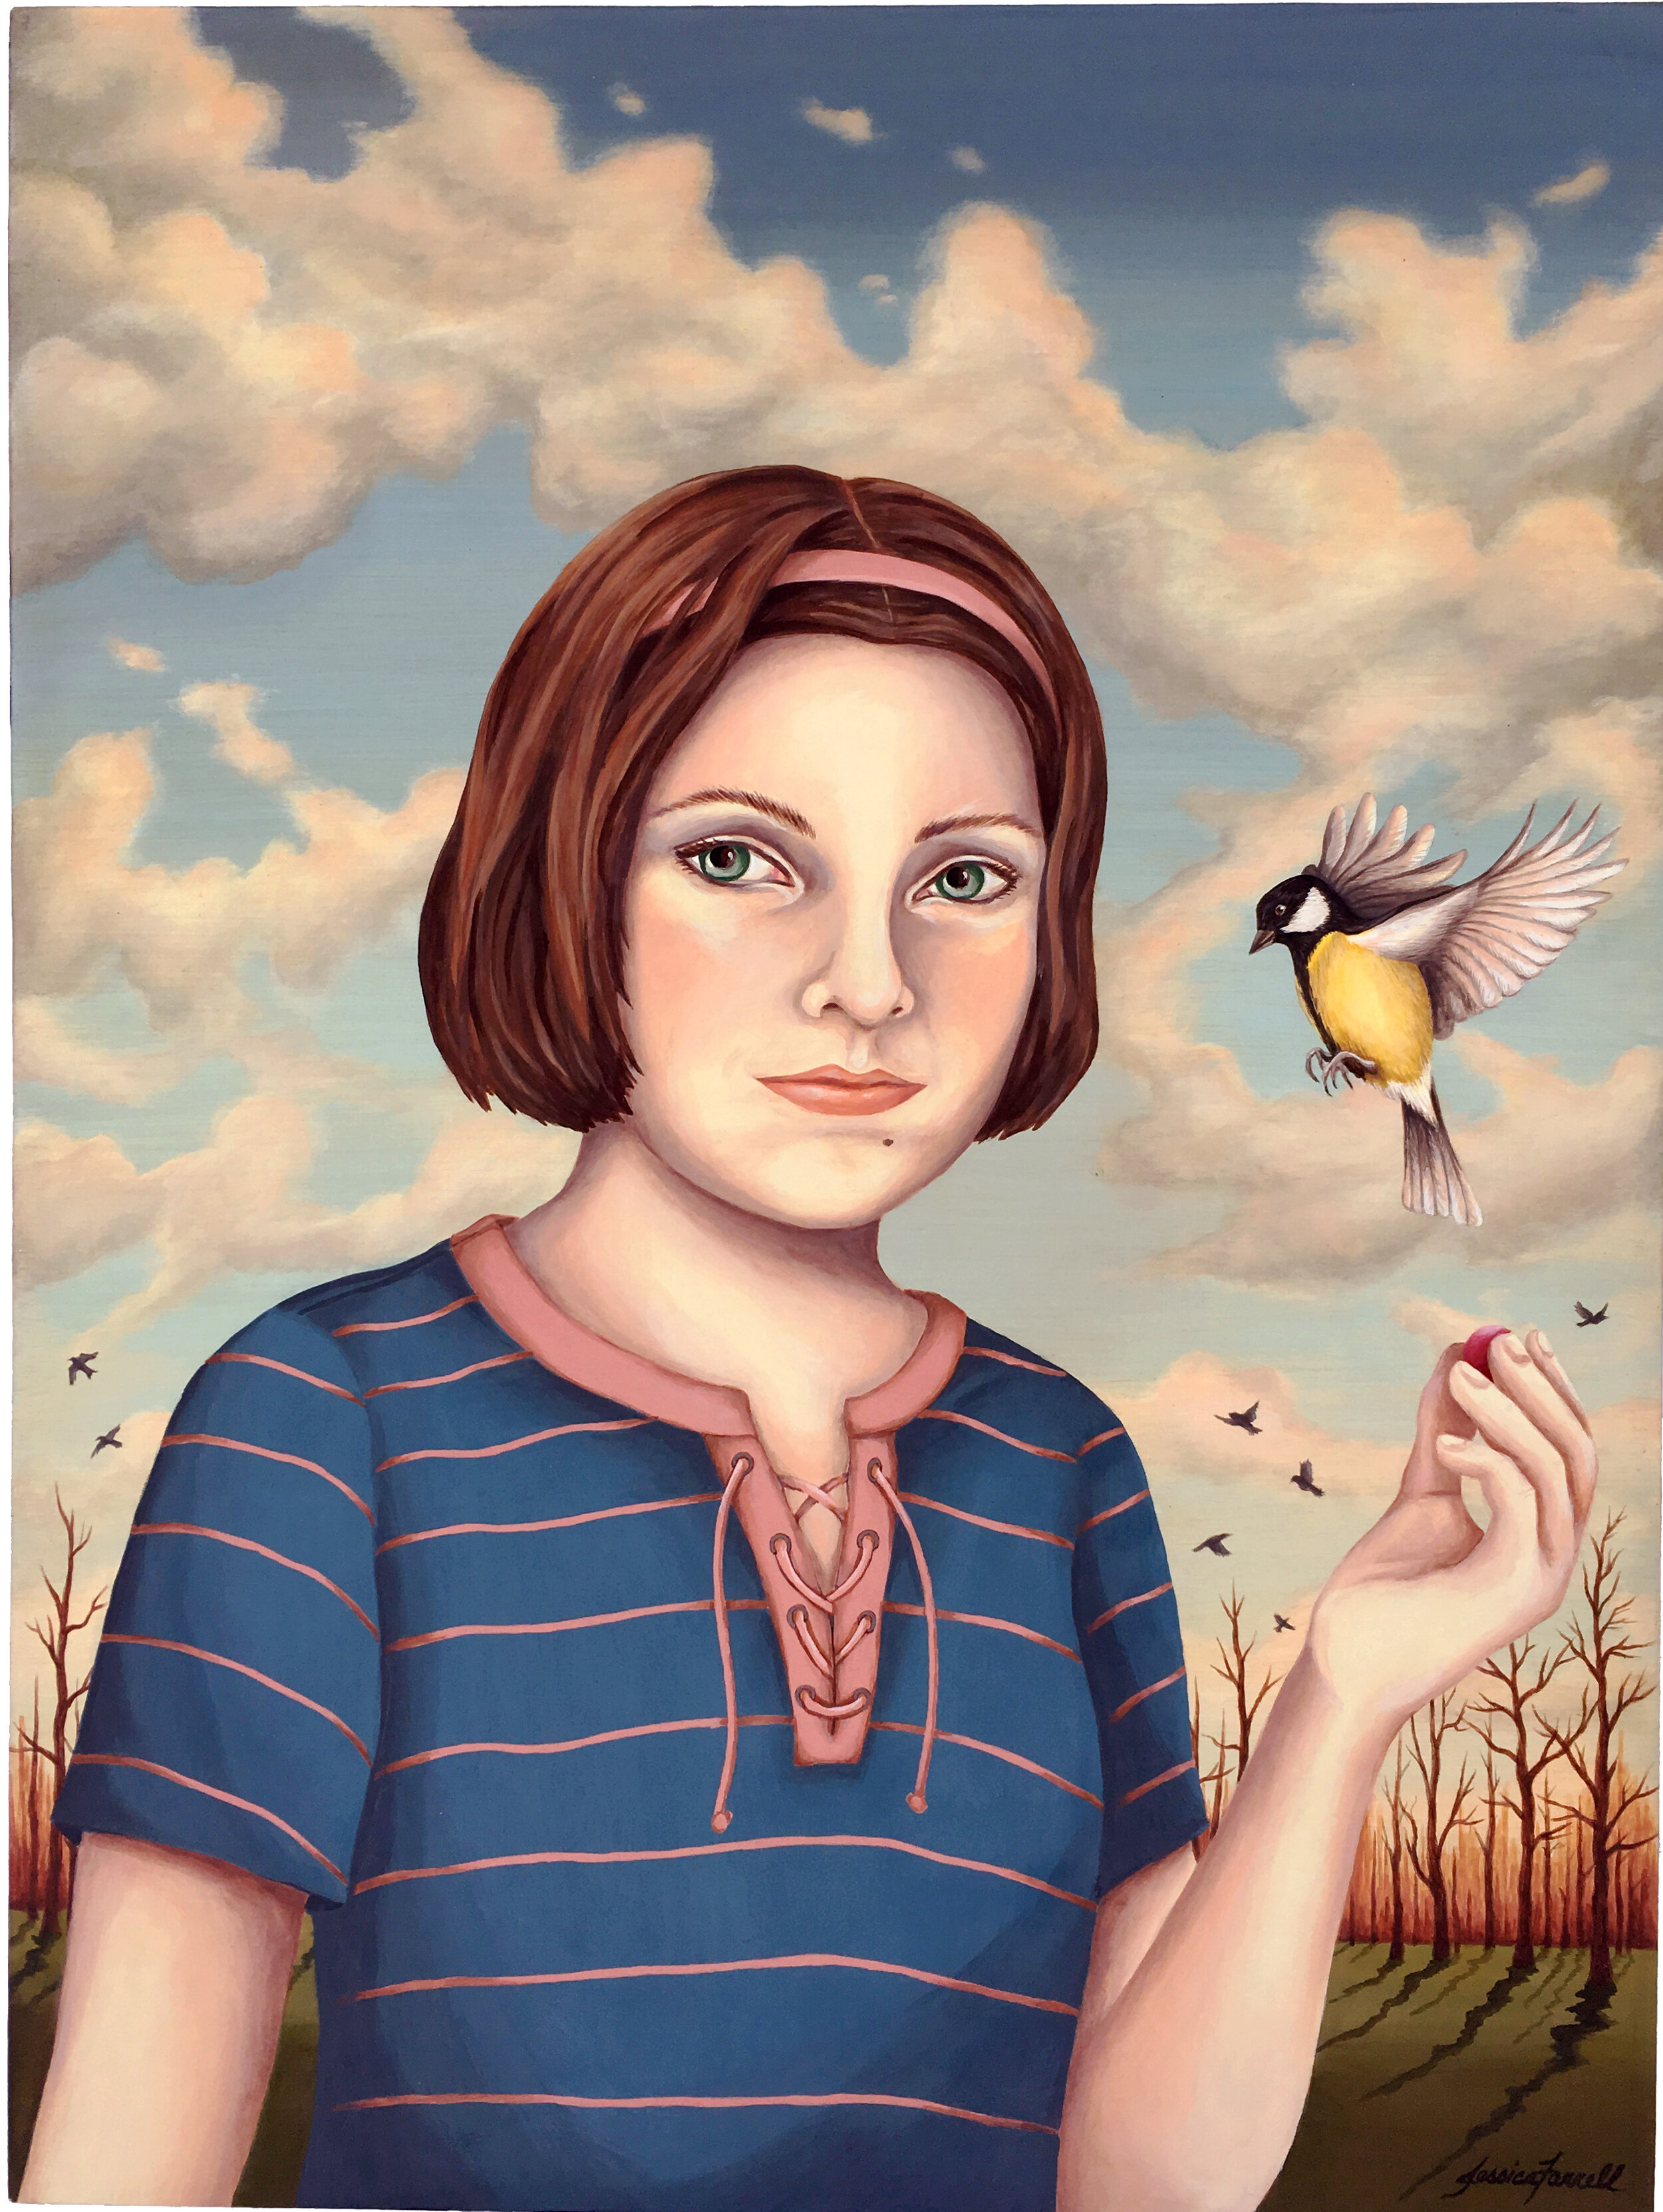   Kate &amp; Yellow Warbler , 2019  Acrylic on wood  24 x 18 inches (unframed)  30 x 24 inches (framed) 